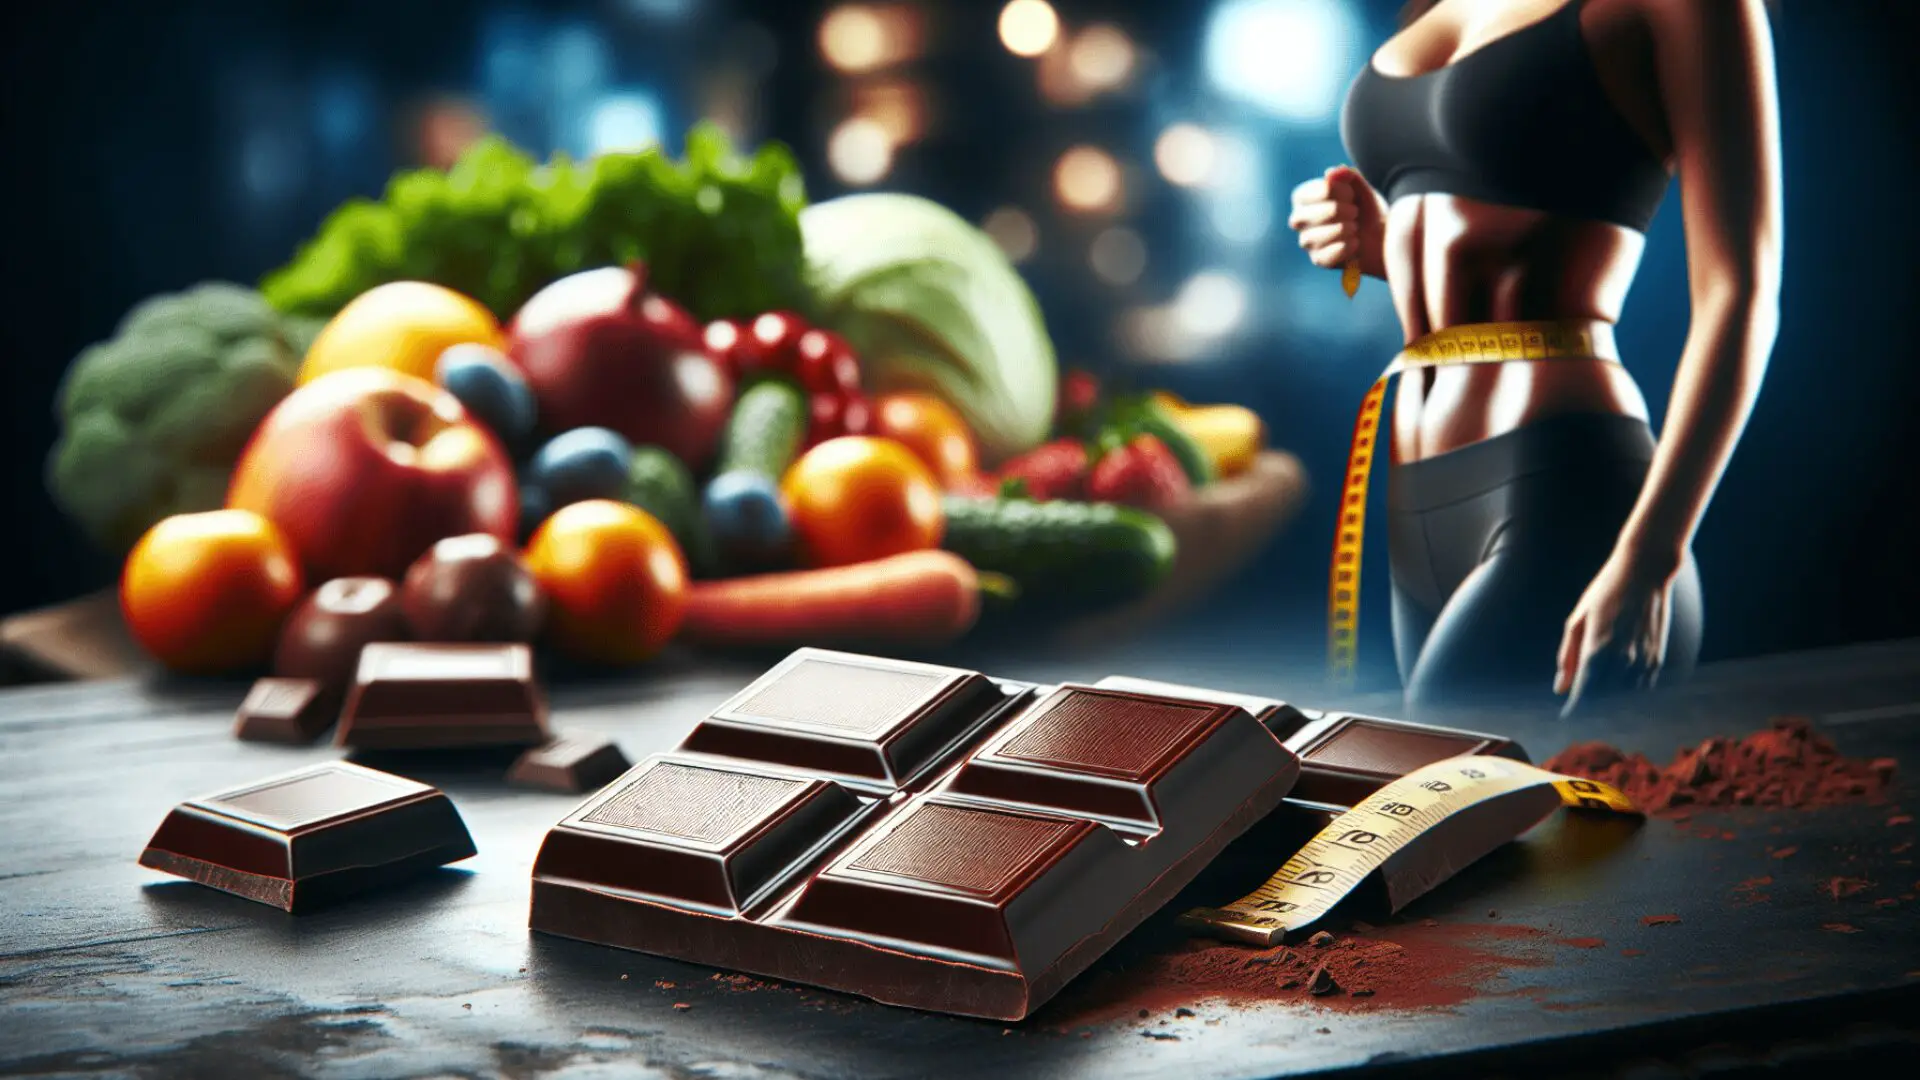 Is Dark Chocolate a Good Choice for Weight Loss